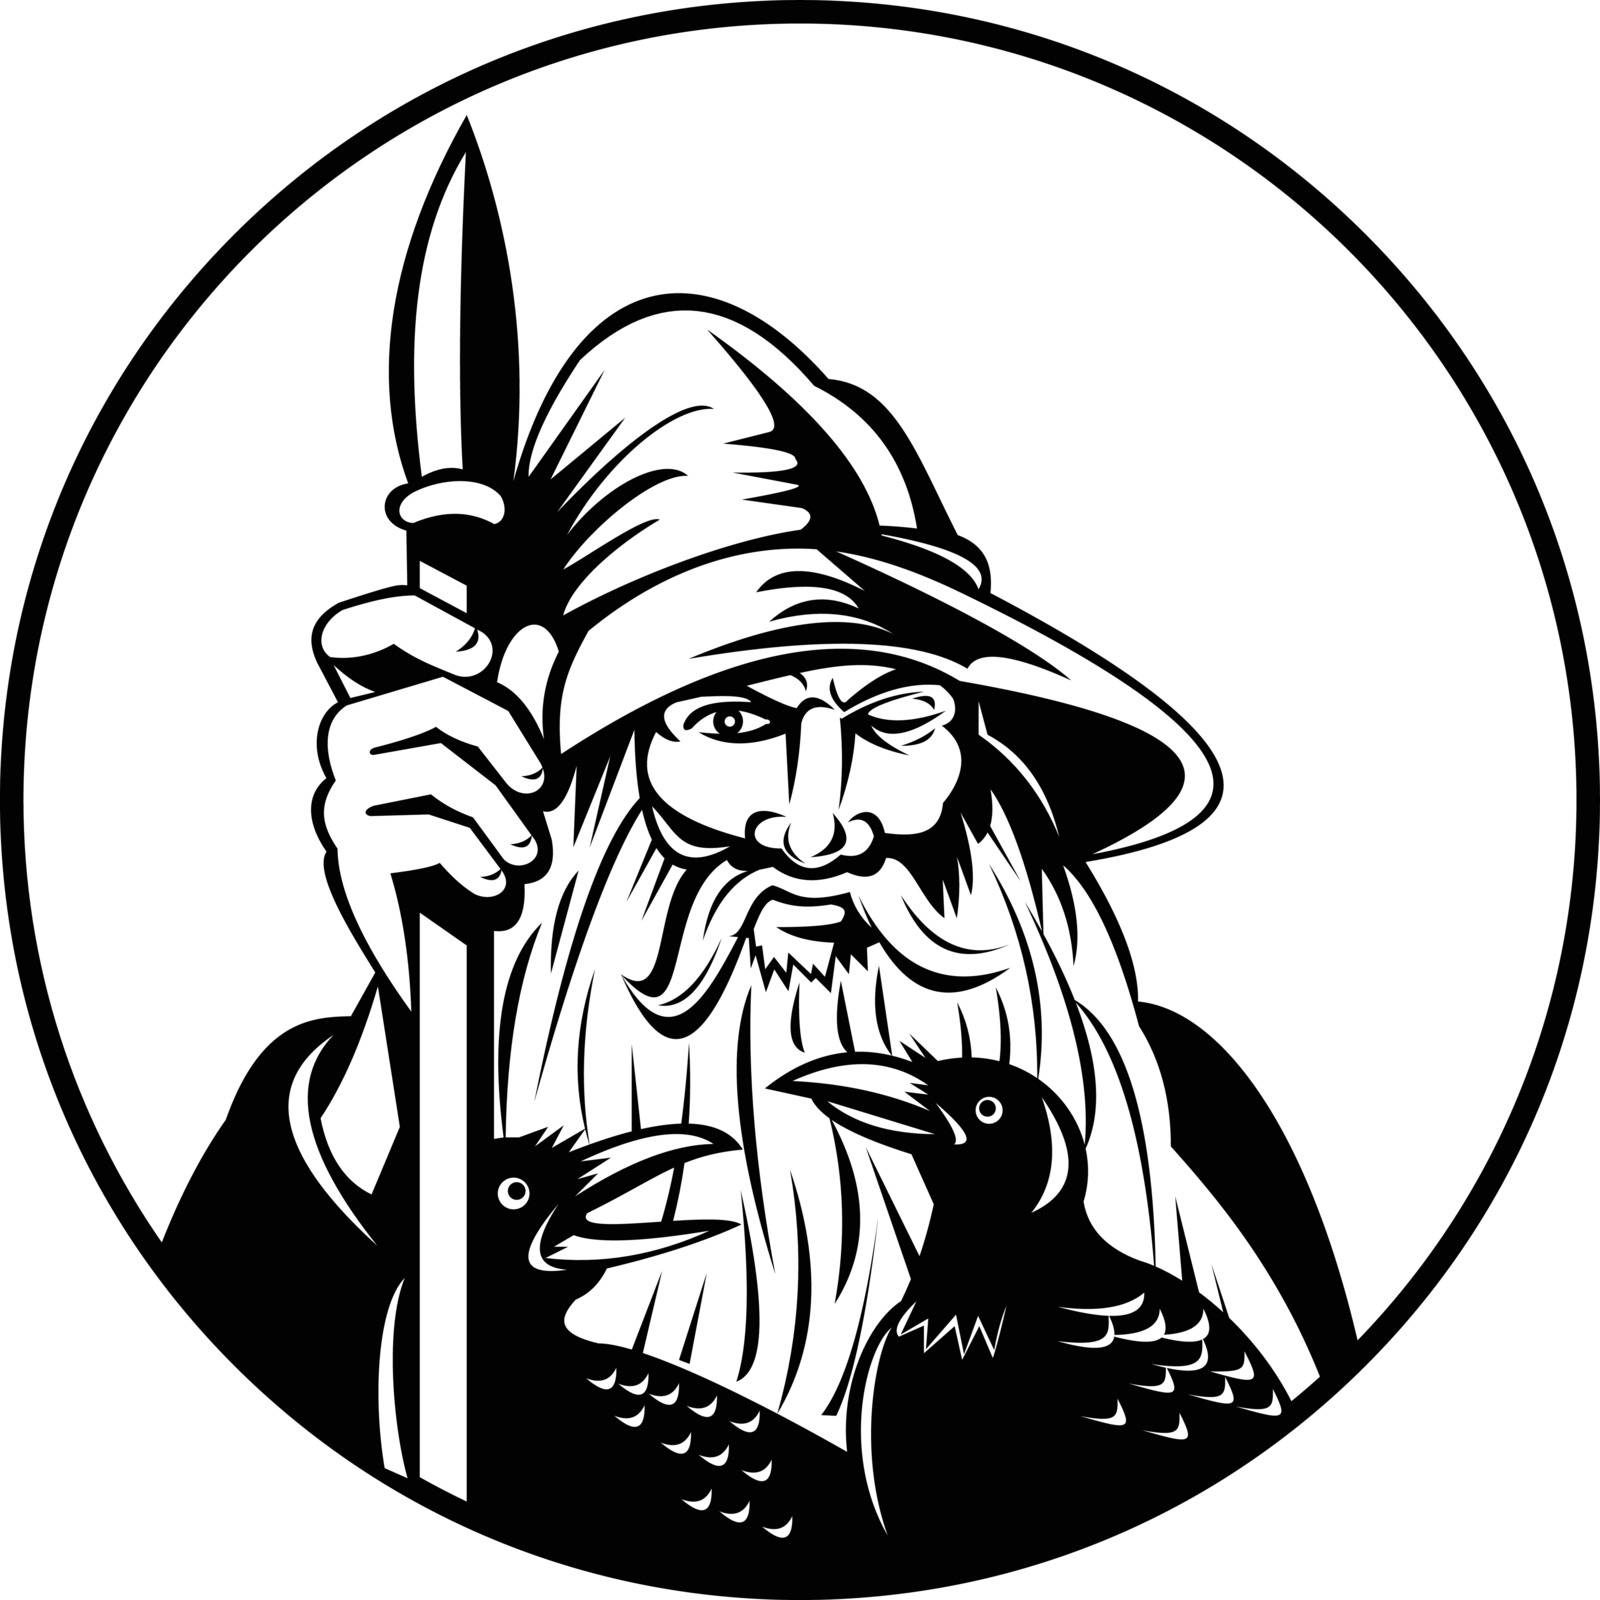 Retro style illustration of Odin, god of war and of the dead in Germanic and Norse mythology, with his ravens and holding a staff or spear inside circle on isolated background in black and white.